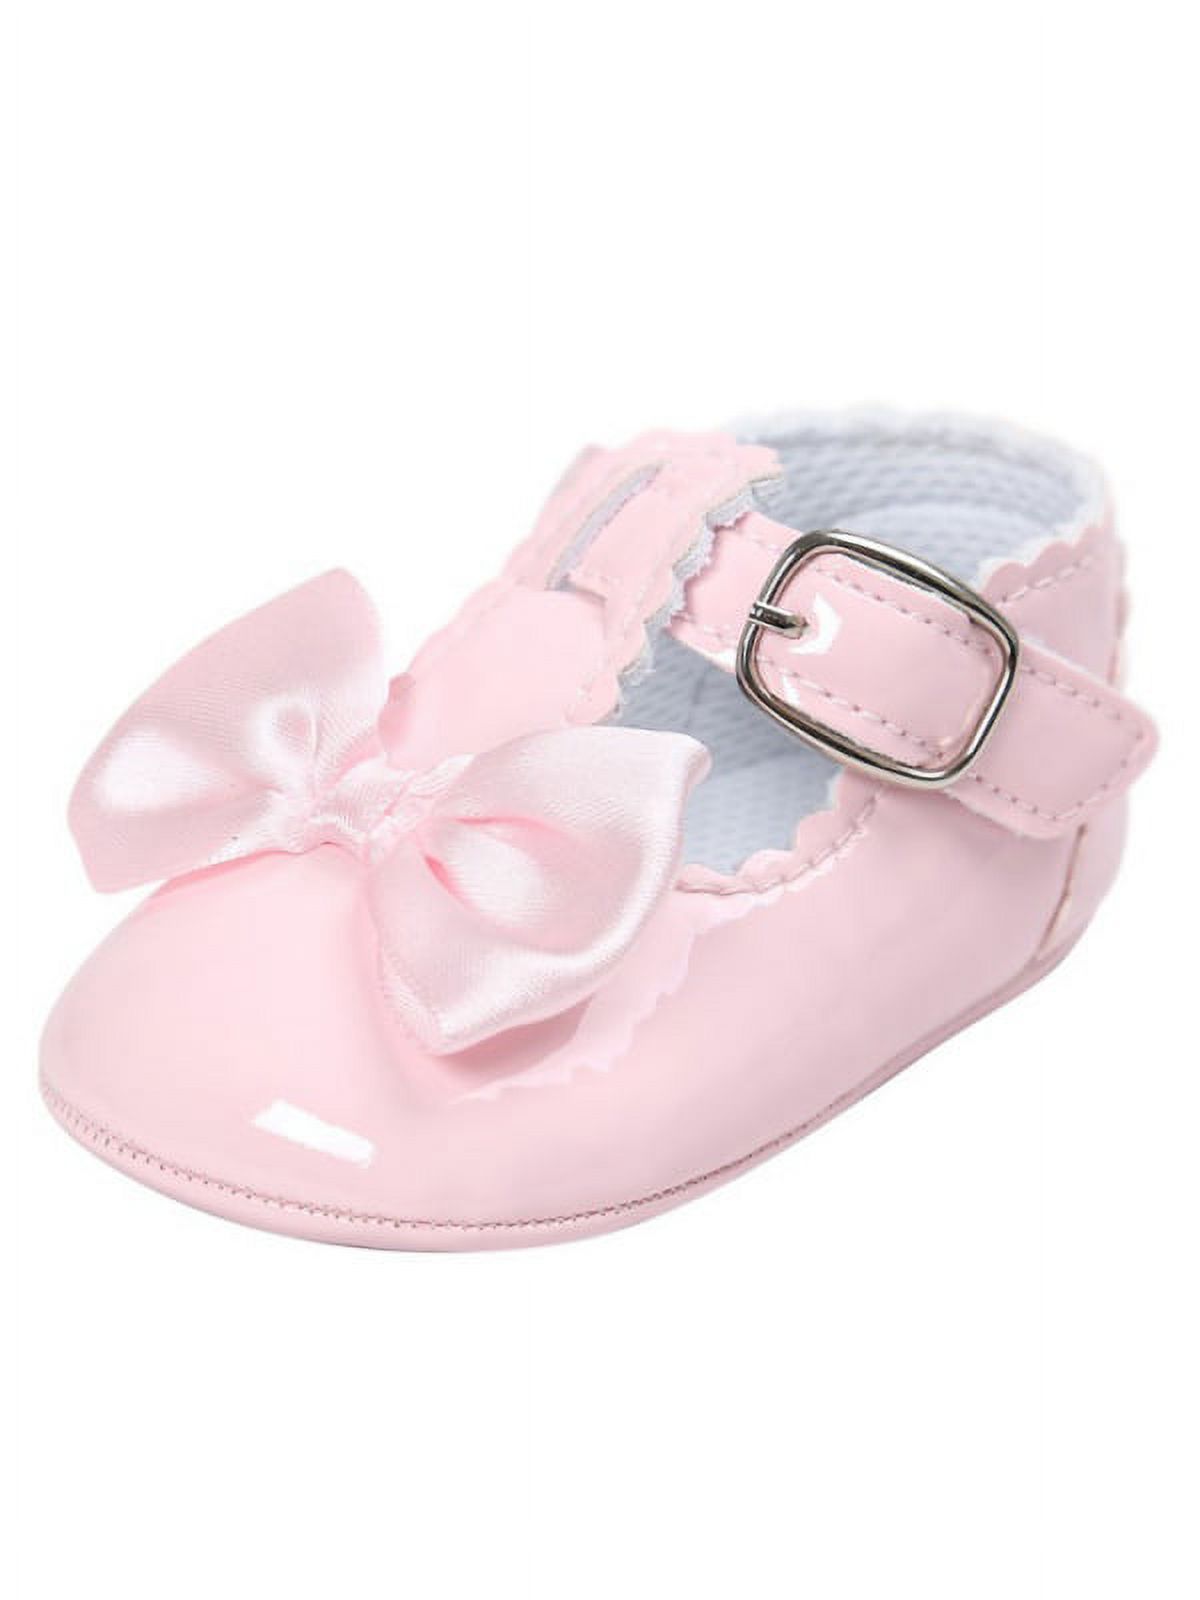 Lavaport Newborn Baby Girls Bowknot Shoes PU Leather Buckle First Walkers - image 1 of 5